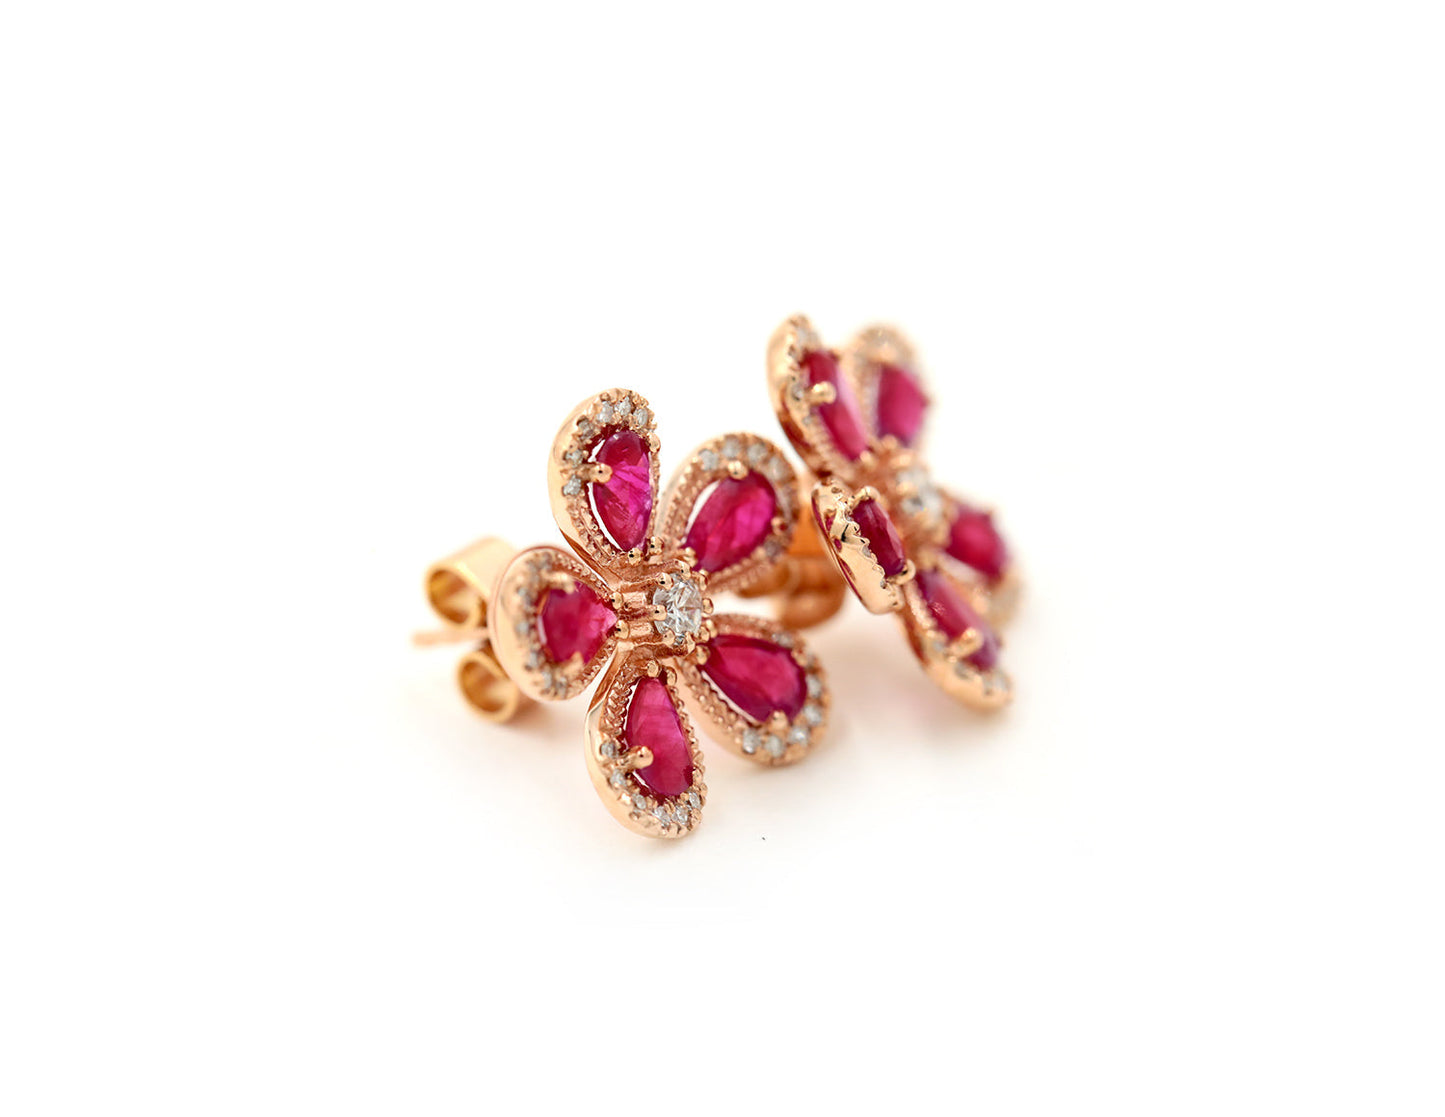 14KT Rose Gold Diamond Pave And Ruby Flower Stud Earrings